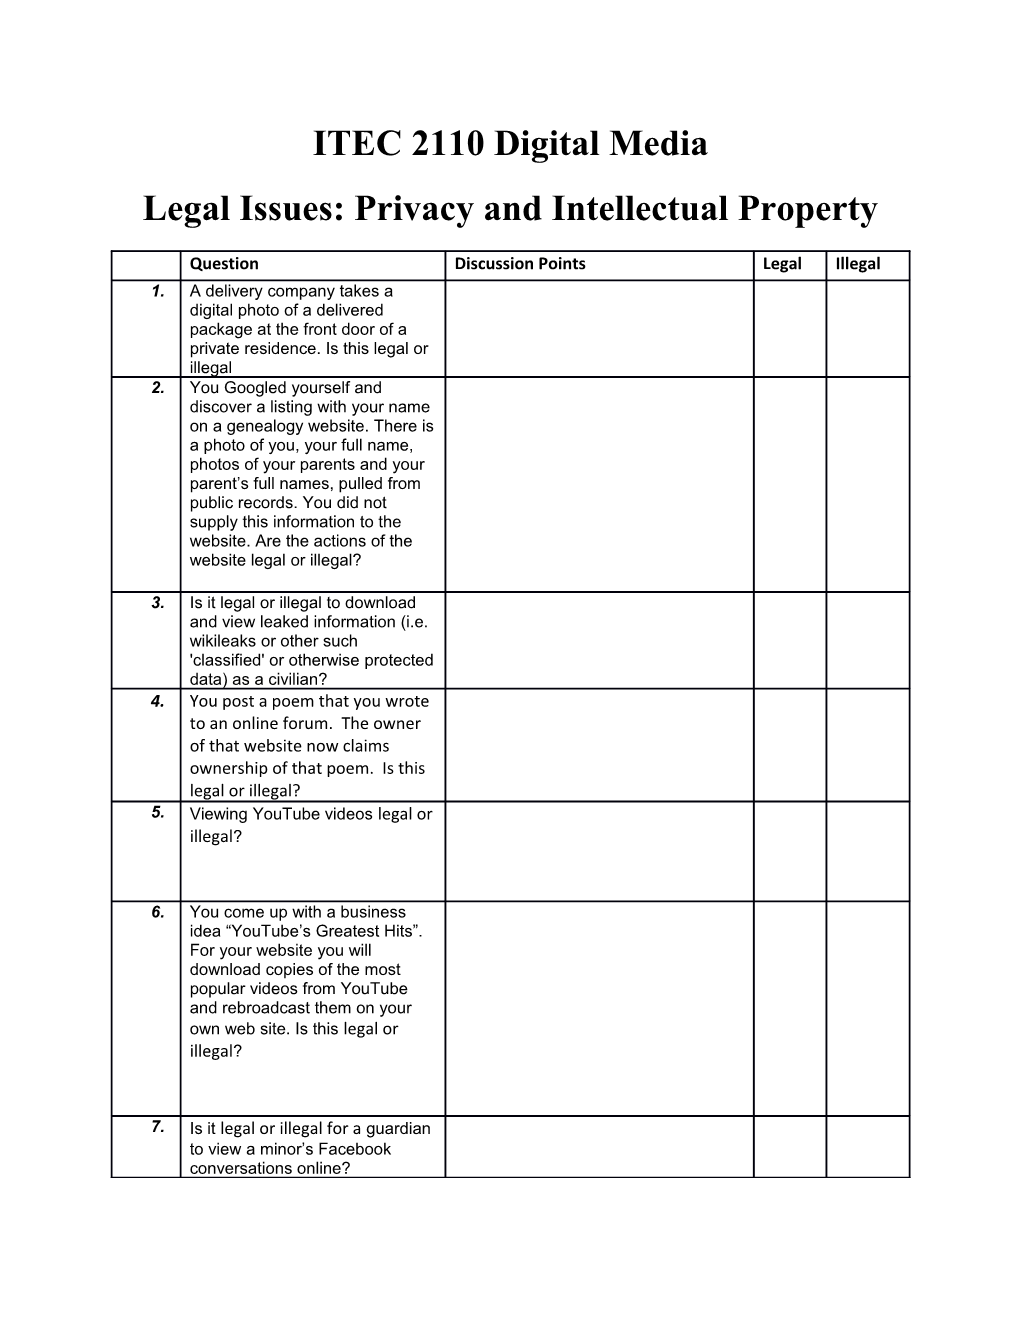 Legal Issues: Privacy and Intellectual Property